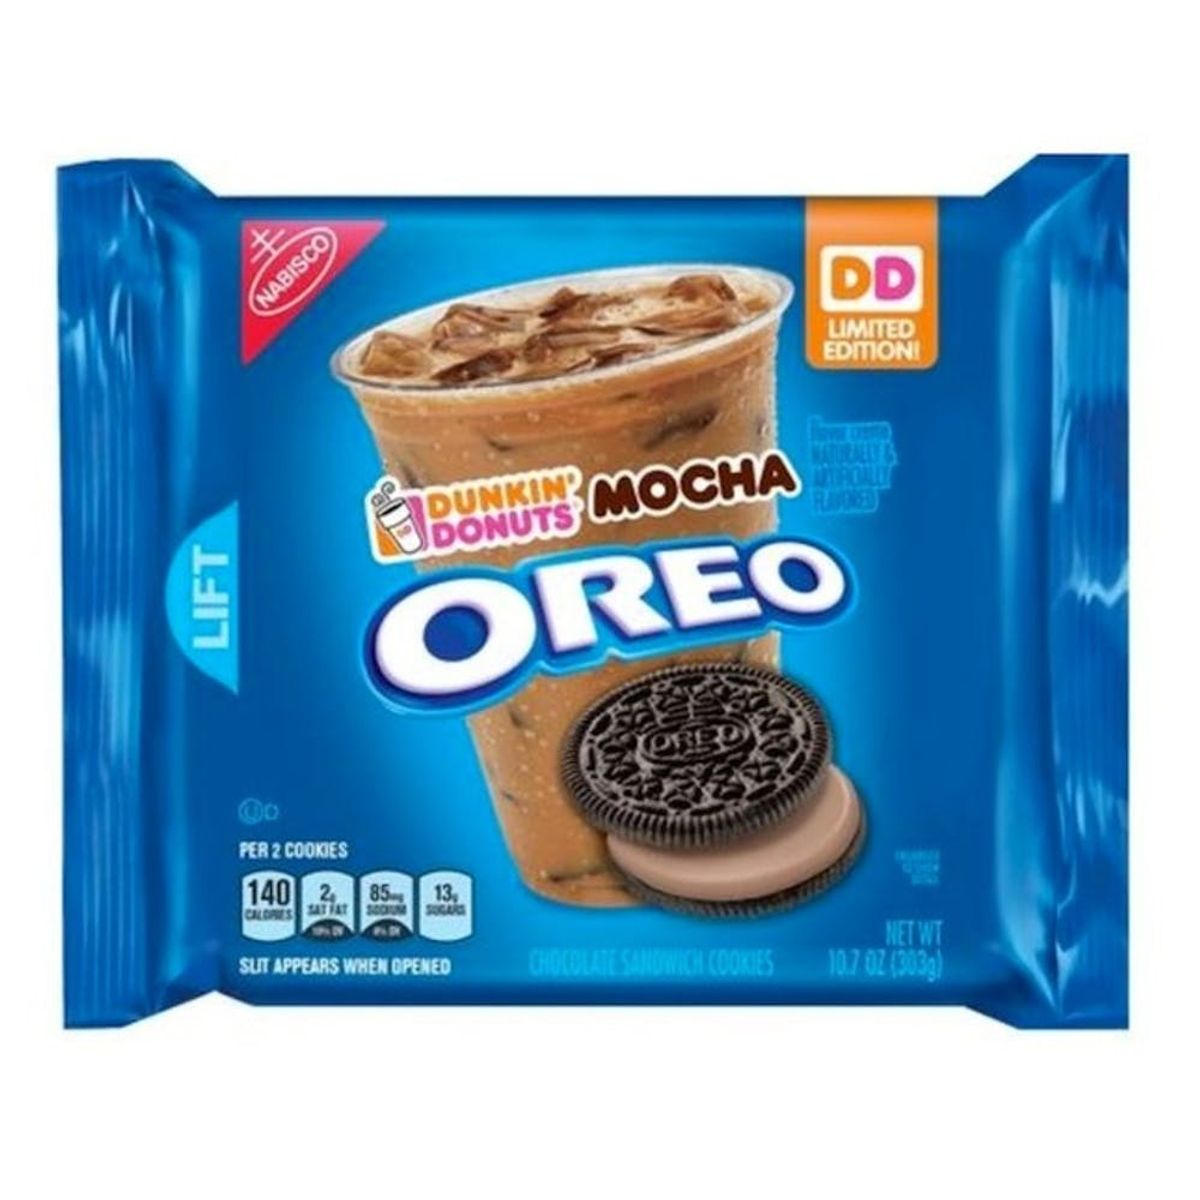 Dunkin’ Donuts Oreo Mocha Cookies Are About to Be Your New Go-To Snack